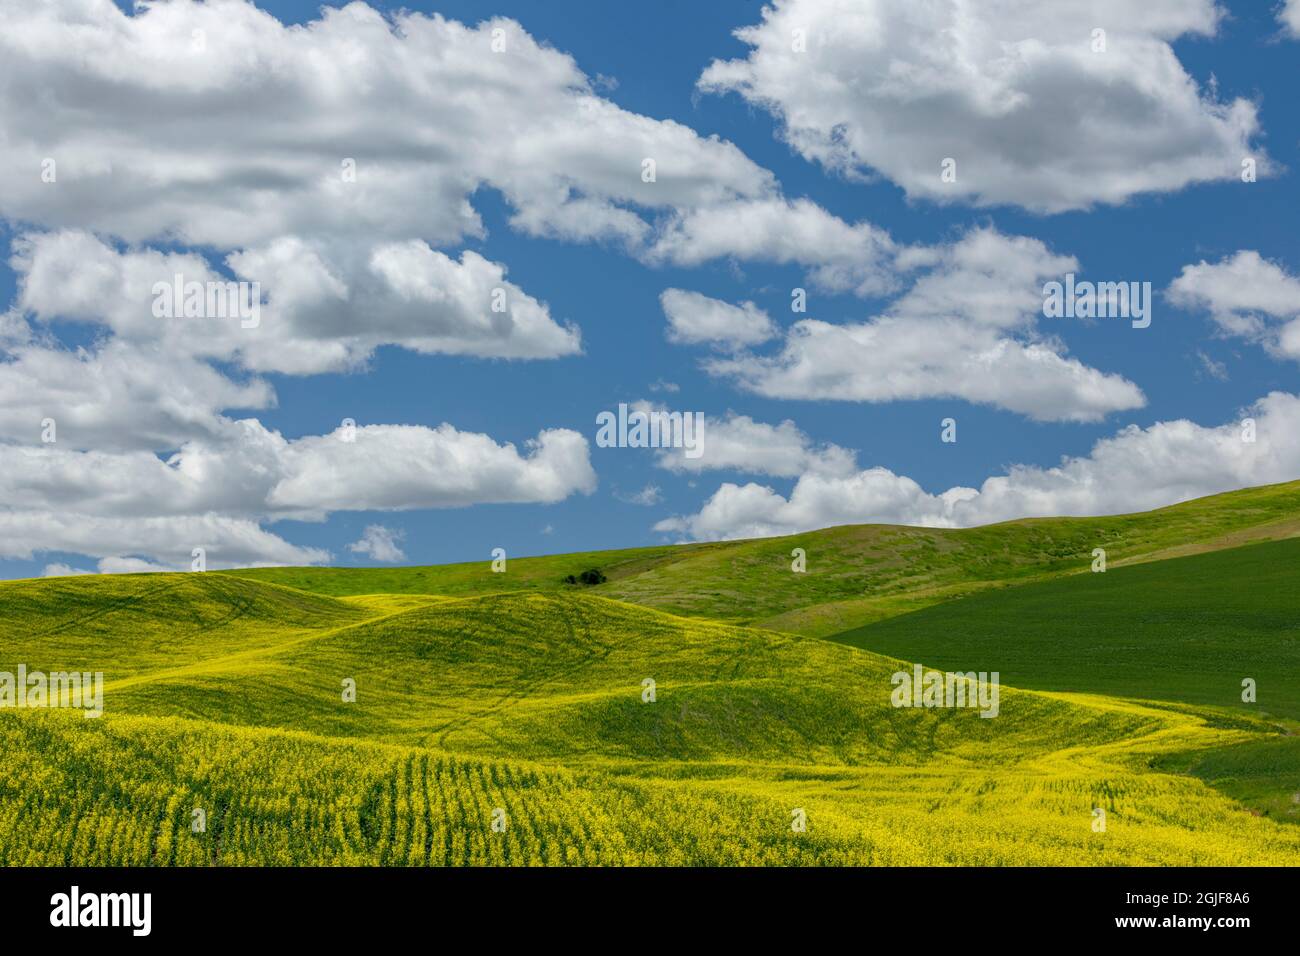 Expansive canola crop on rolling hills and cumulus clouds, Palouse agricultural region of Eastern Washington State. Stock Photo